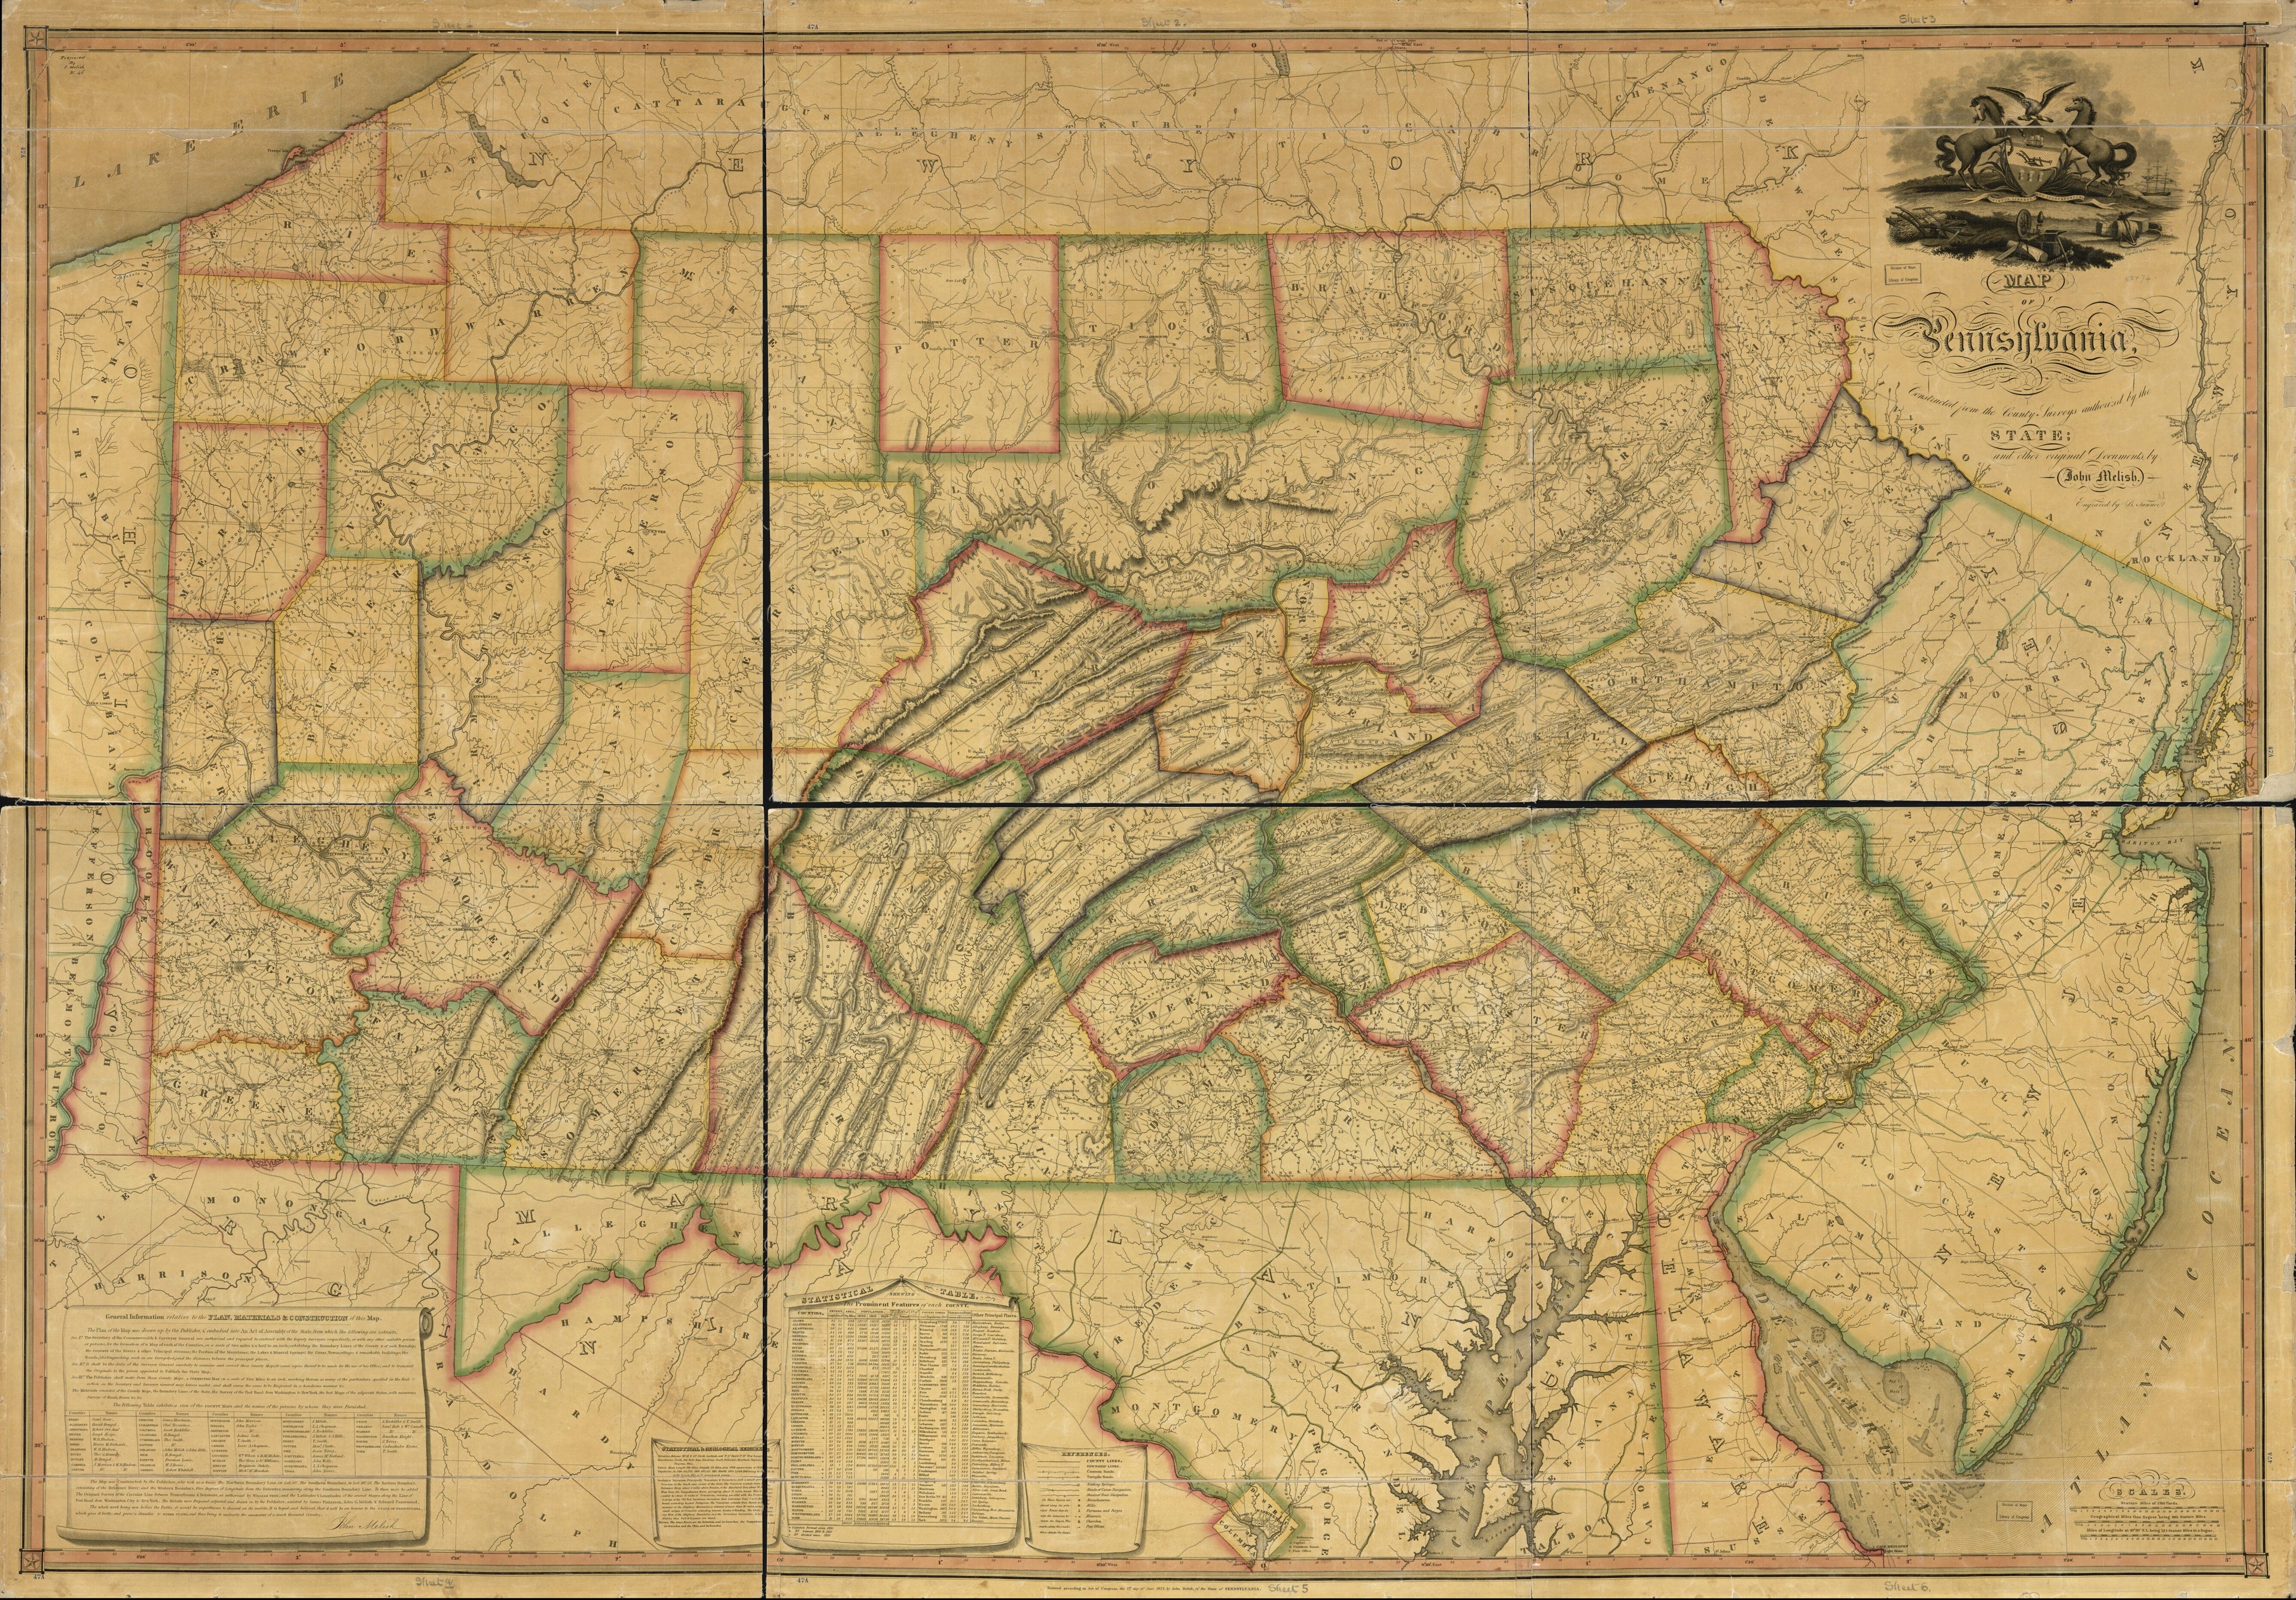 This old map of Map of Pennsylvania : Constructed from the County Surveys Authorized by the State and Other Original Documents from 1822 was created by Francis Kearny, John Melish, Benjamin Tanner in 1822